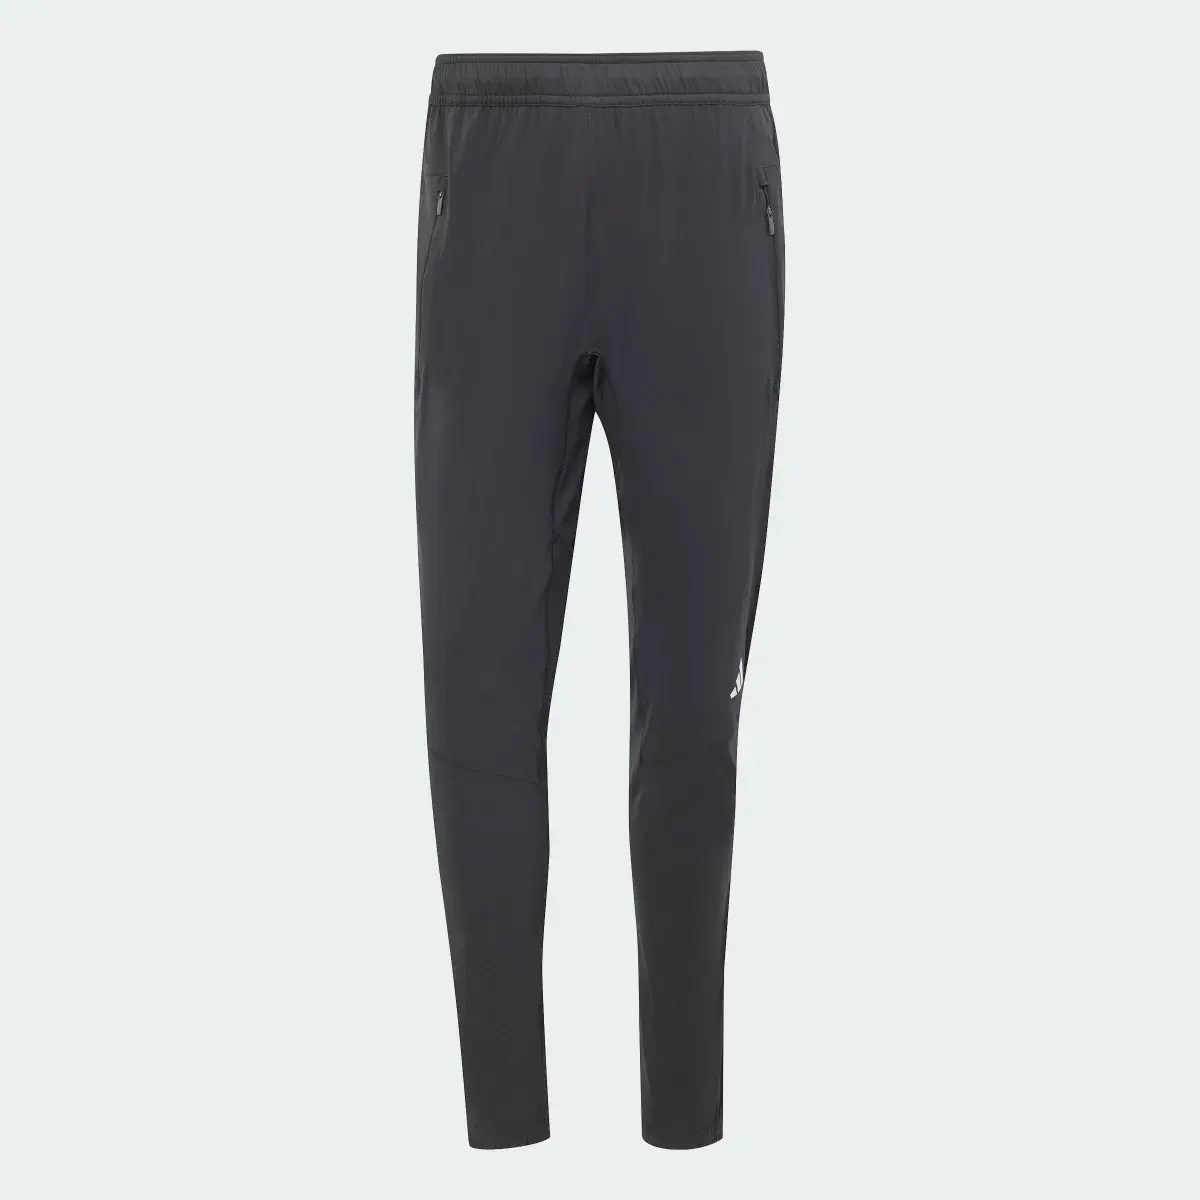 Adidas Designed for Training Workout Joggers. 3